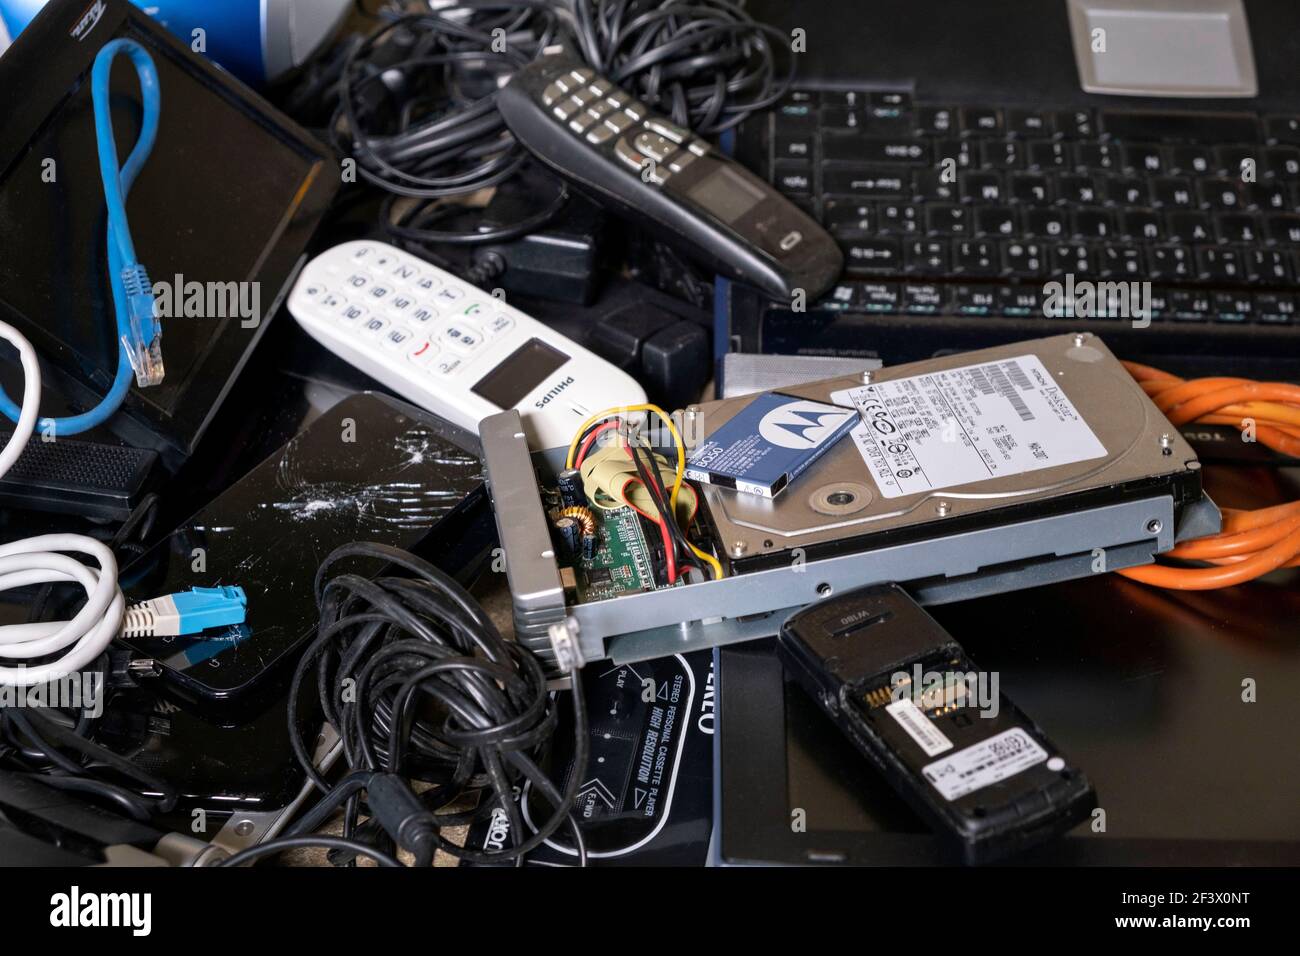 Electrical and electronic waste: various cables, computer, phones, smartphones, devices and used electronic components intended for waste disposal. Stock Photo